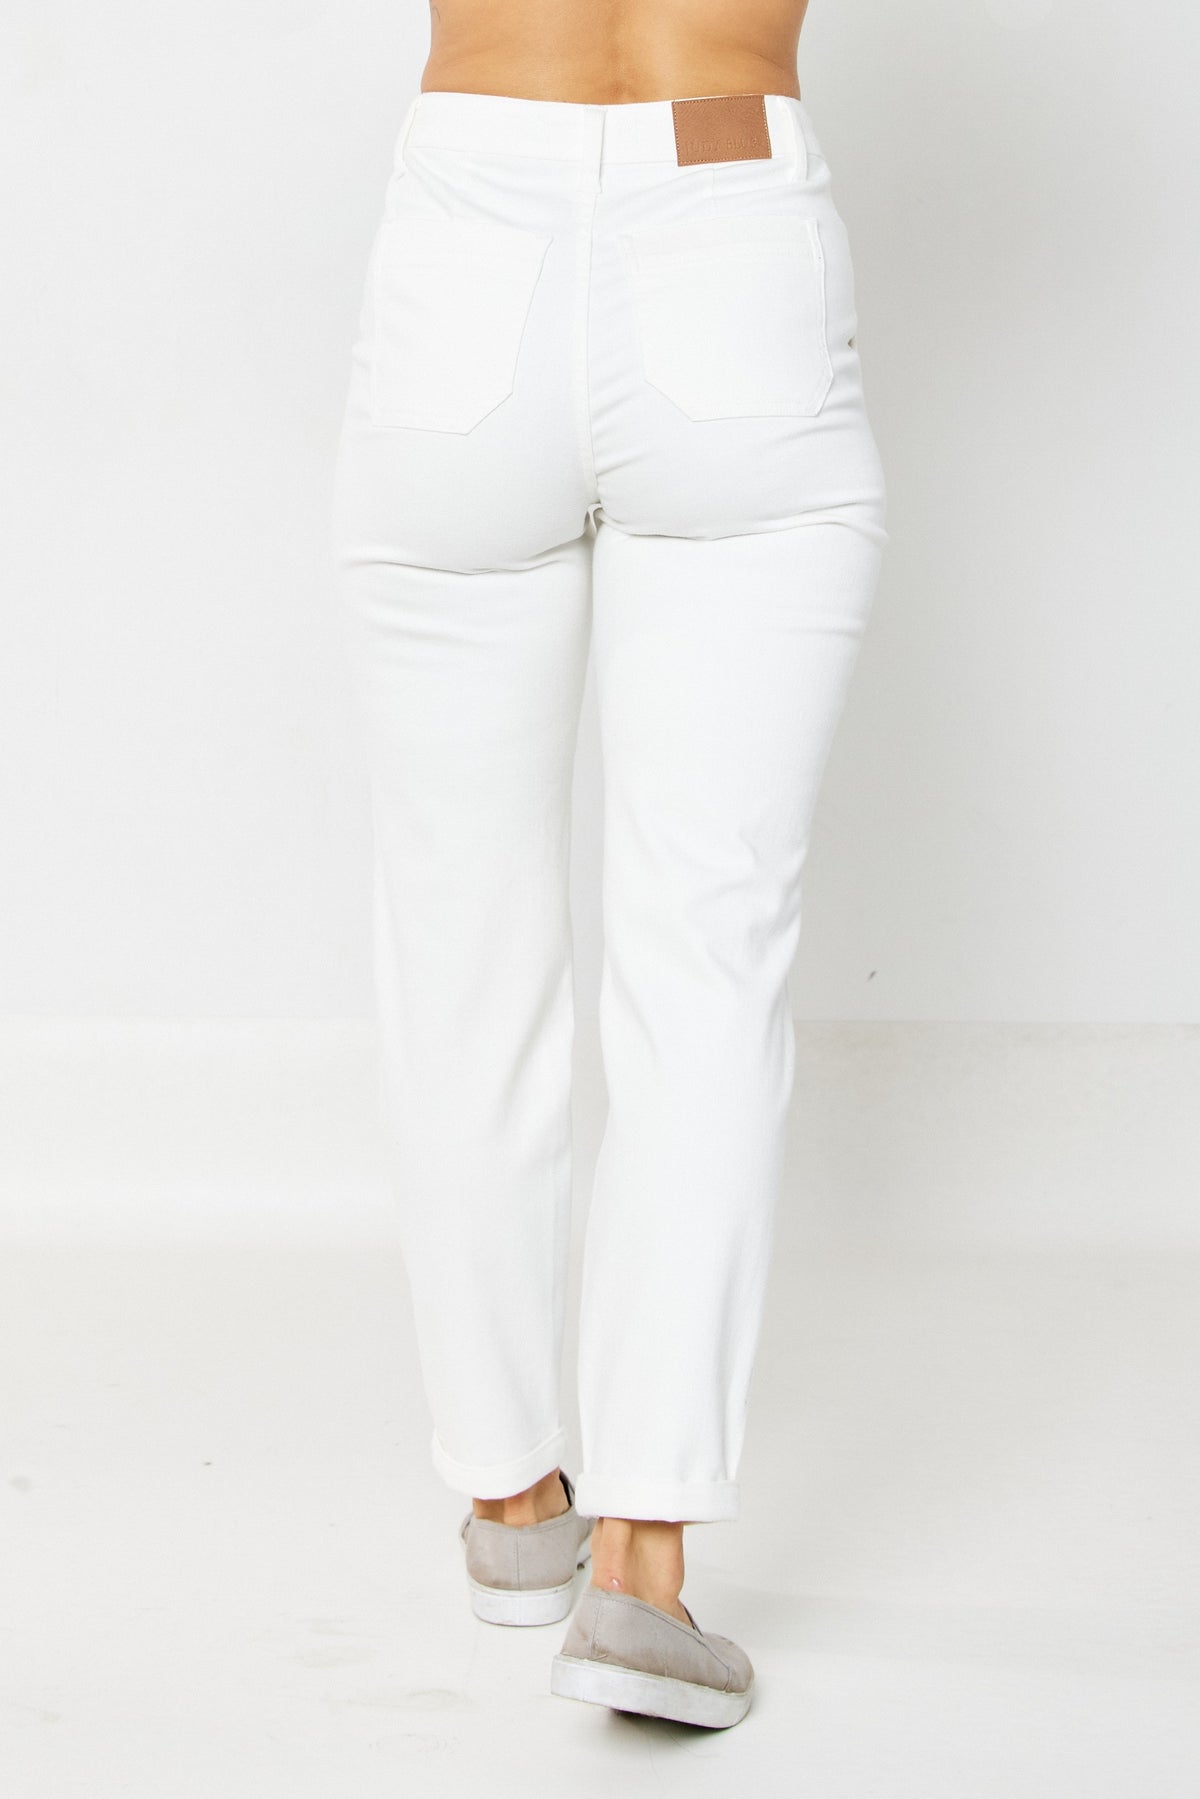 judy blue high waisted garmet dyed cuffed jogger pants in white-back